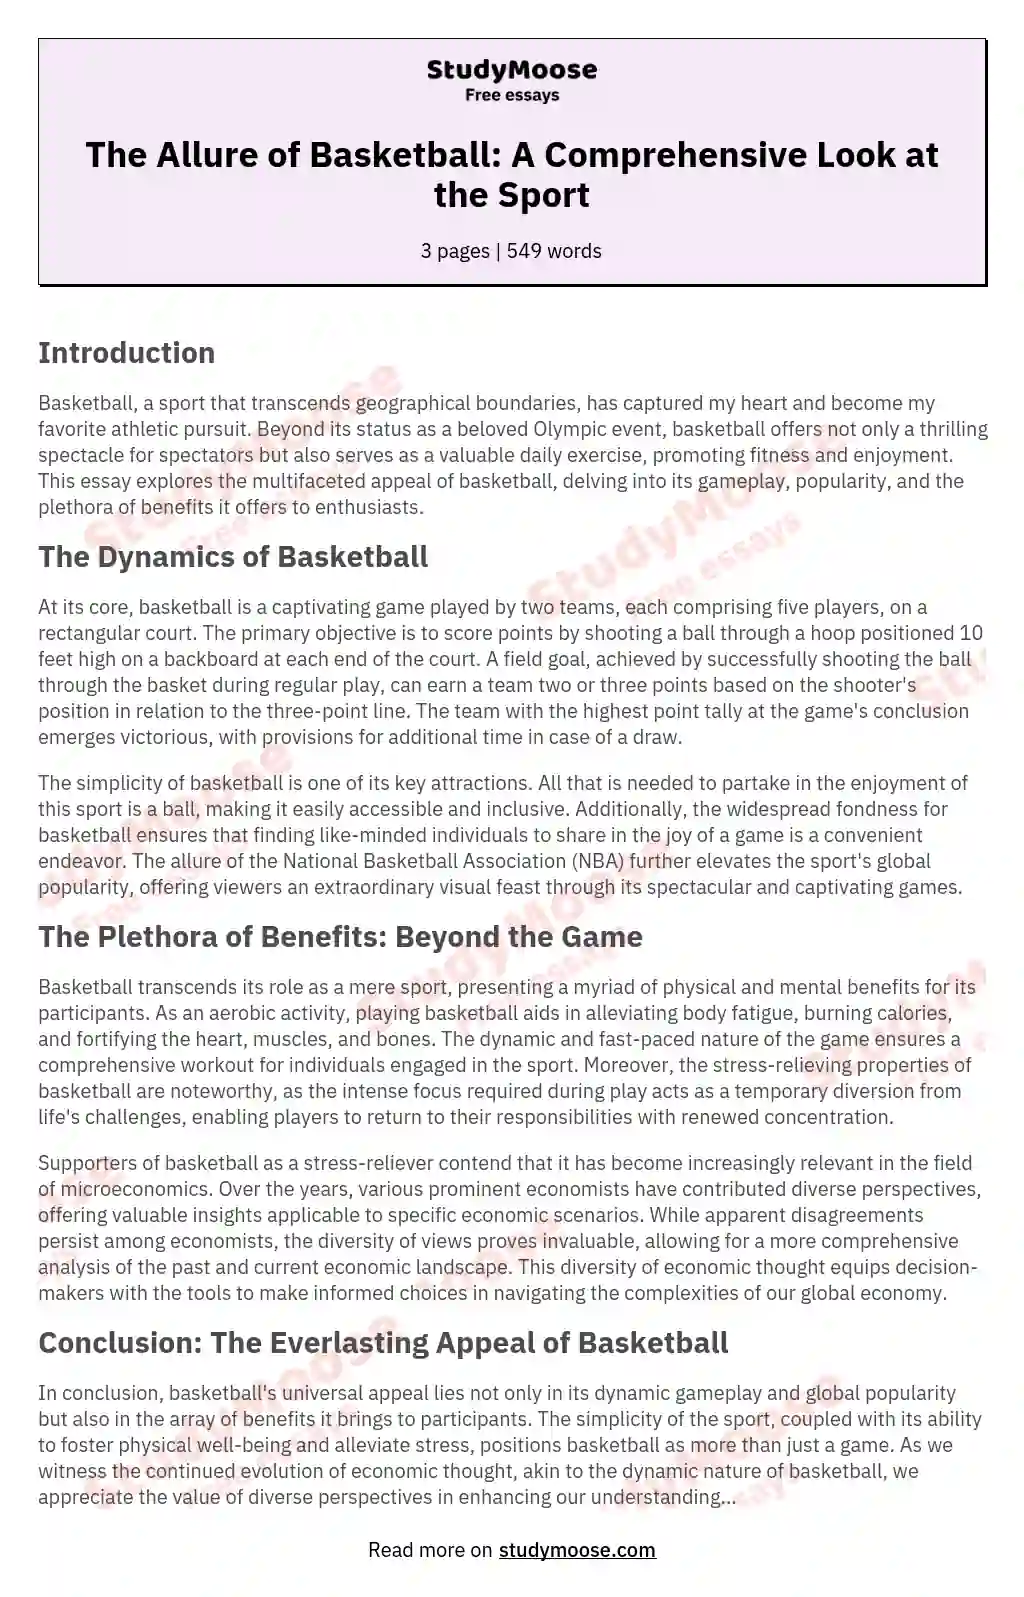 The Allure of Basketball: A Comprehensive Look at the Sport essay